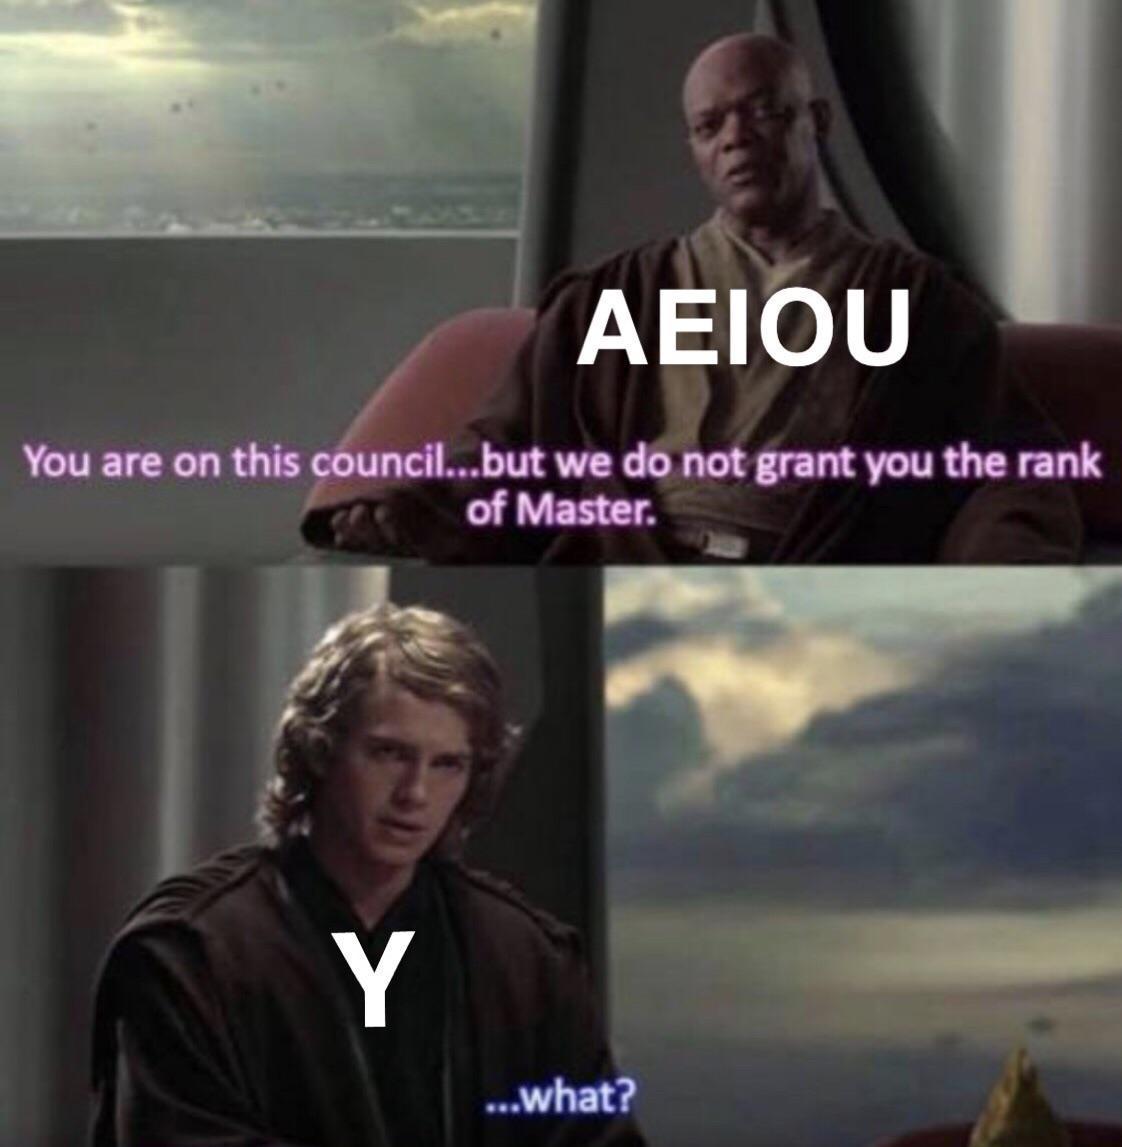 You are still not a Master